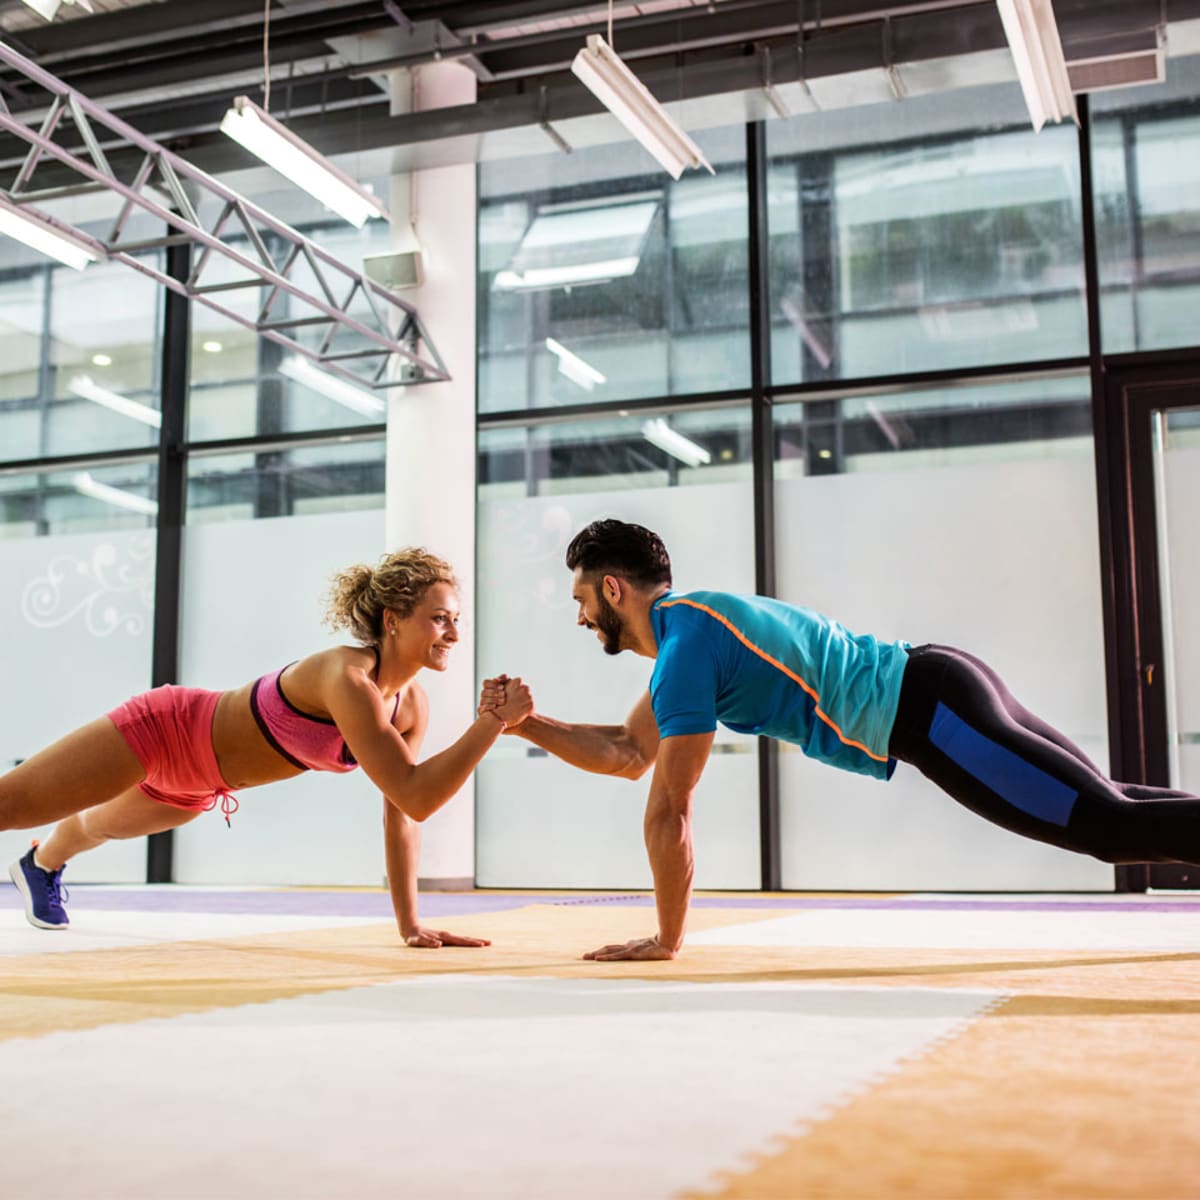 The Ultimate Valentine's Day Power Couple Workout: Partner Routine